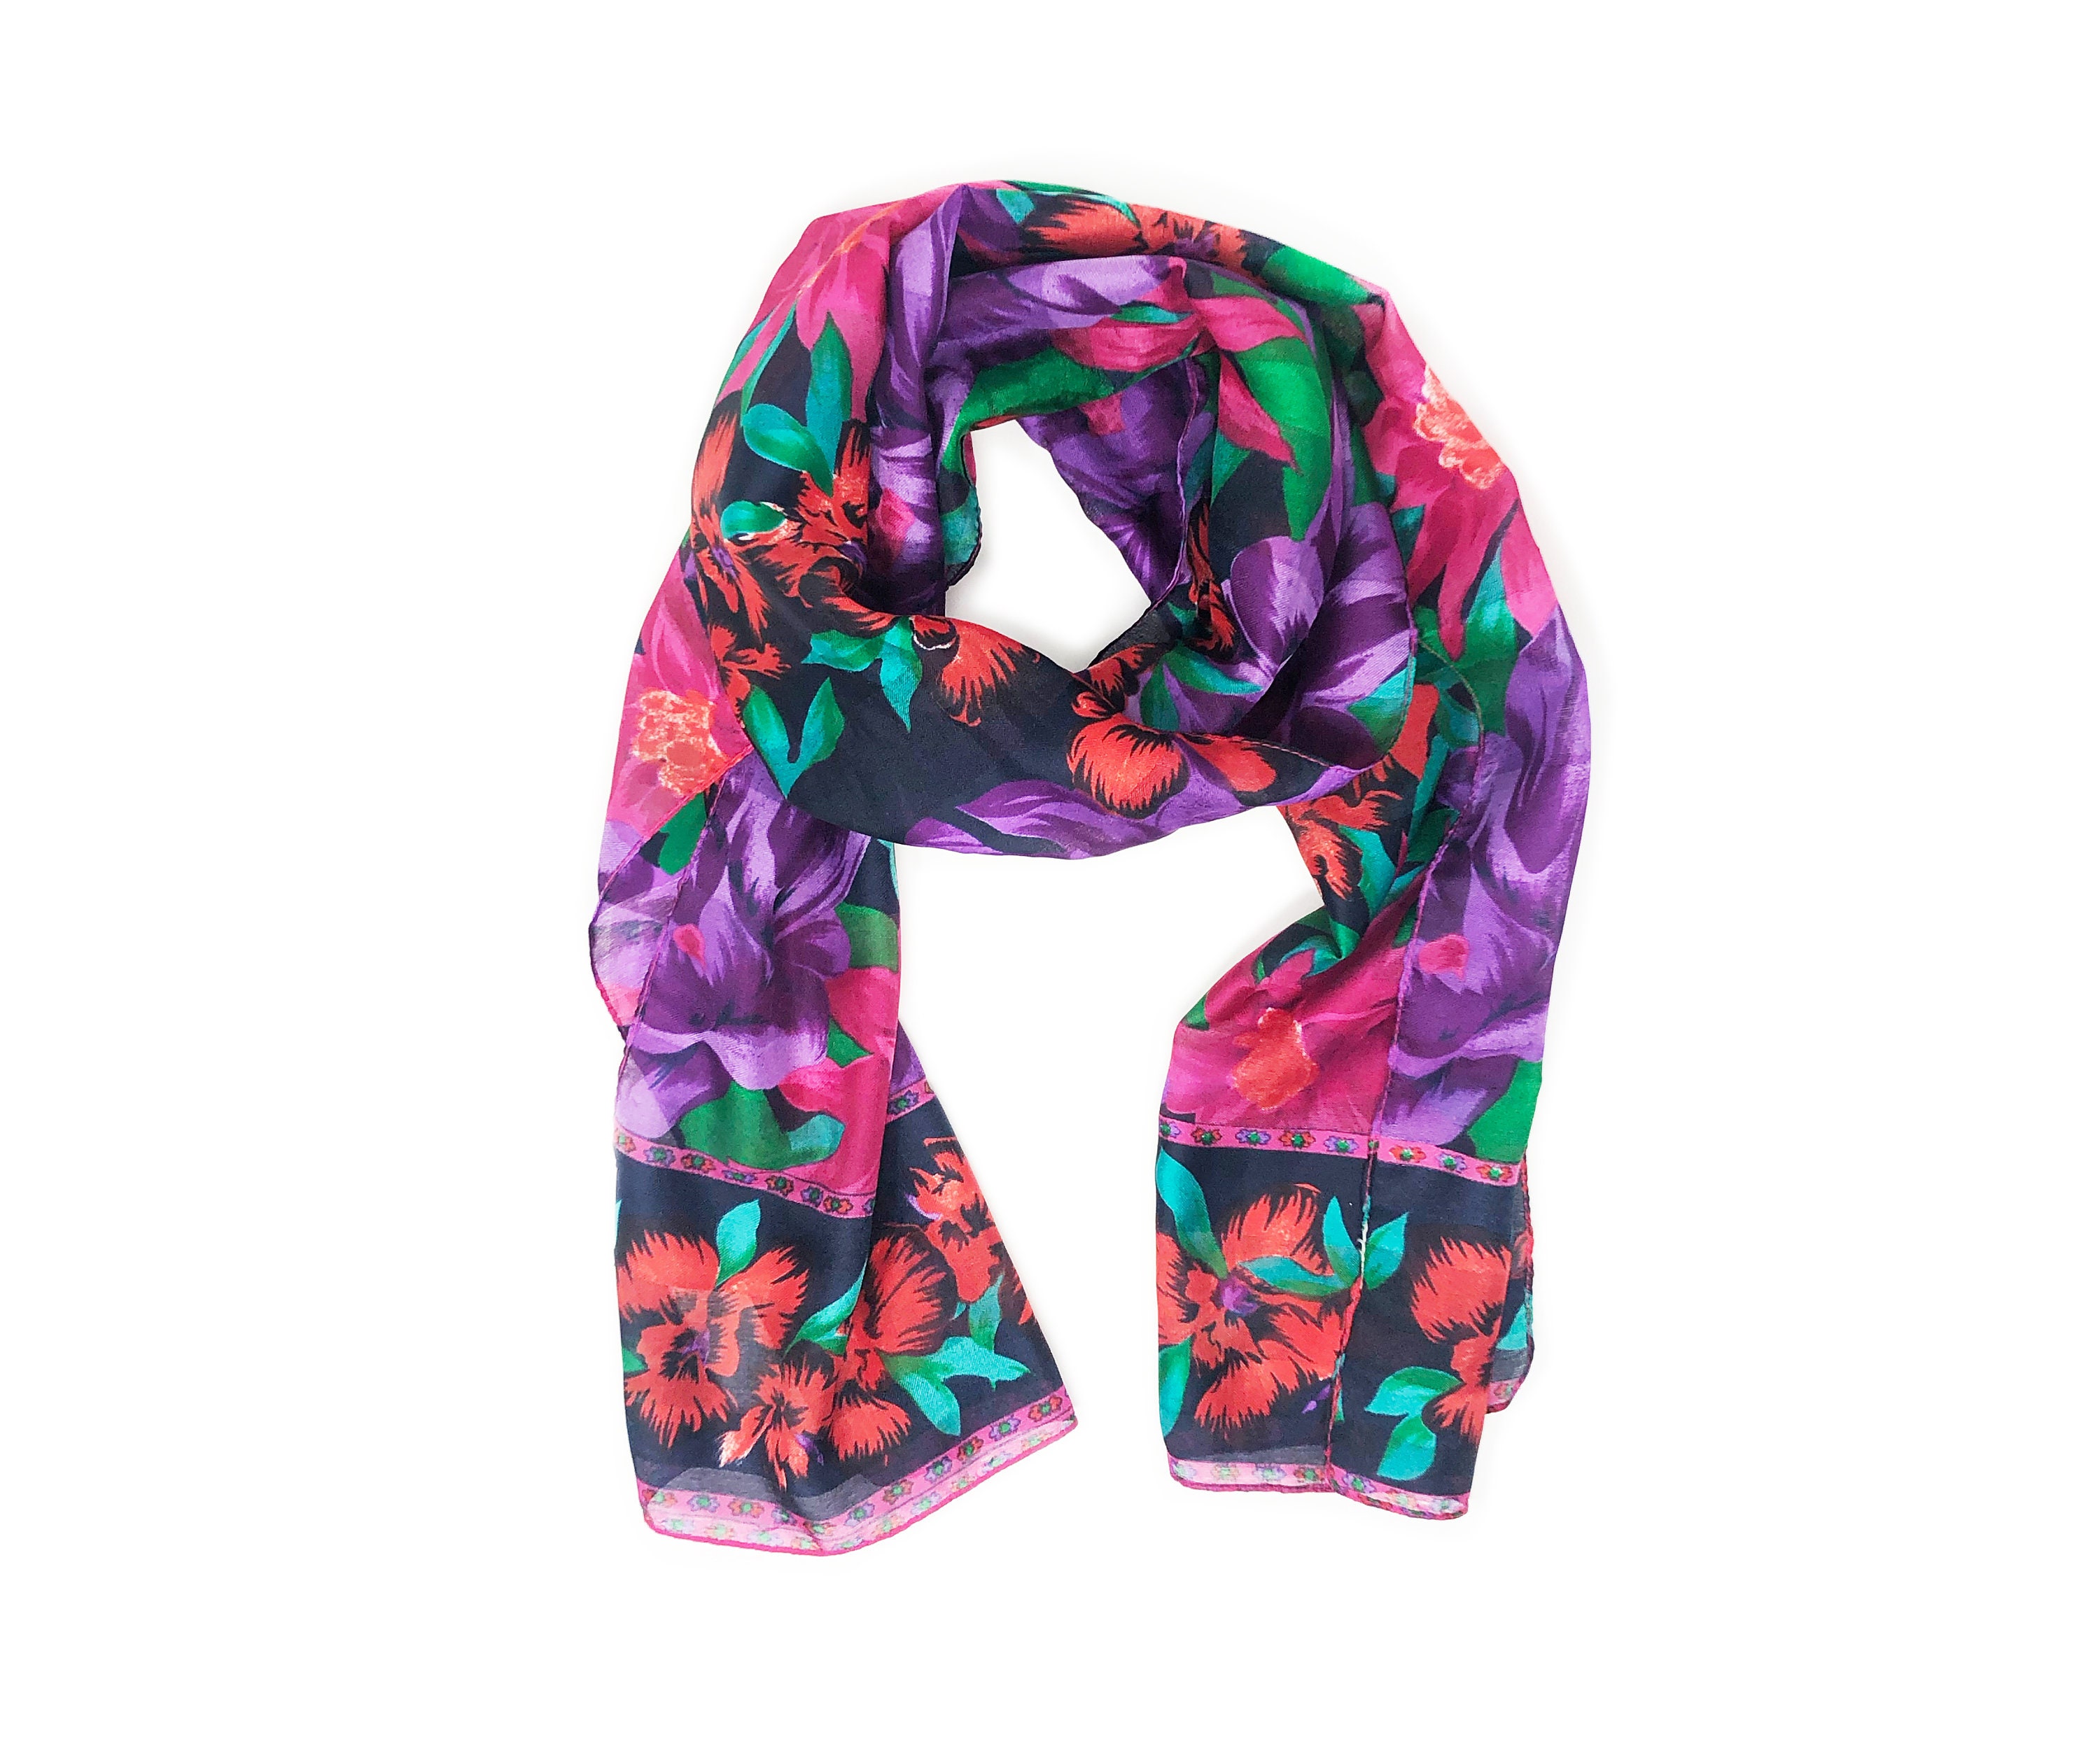 9STYLES Lavender Red Black Lily Flower Satin Scarf Womens Fashion